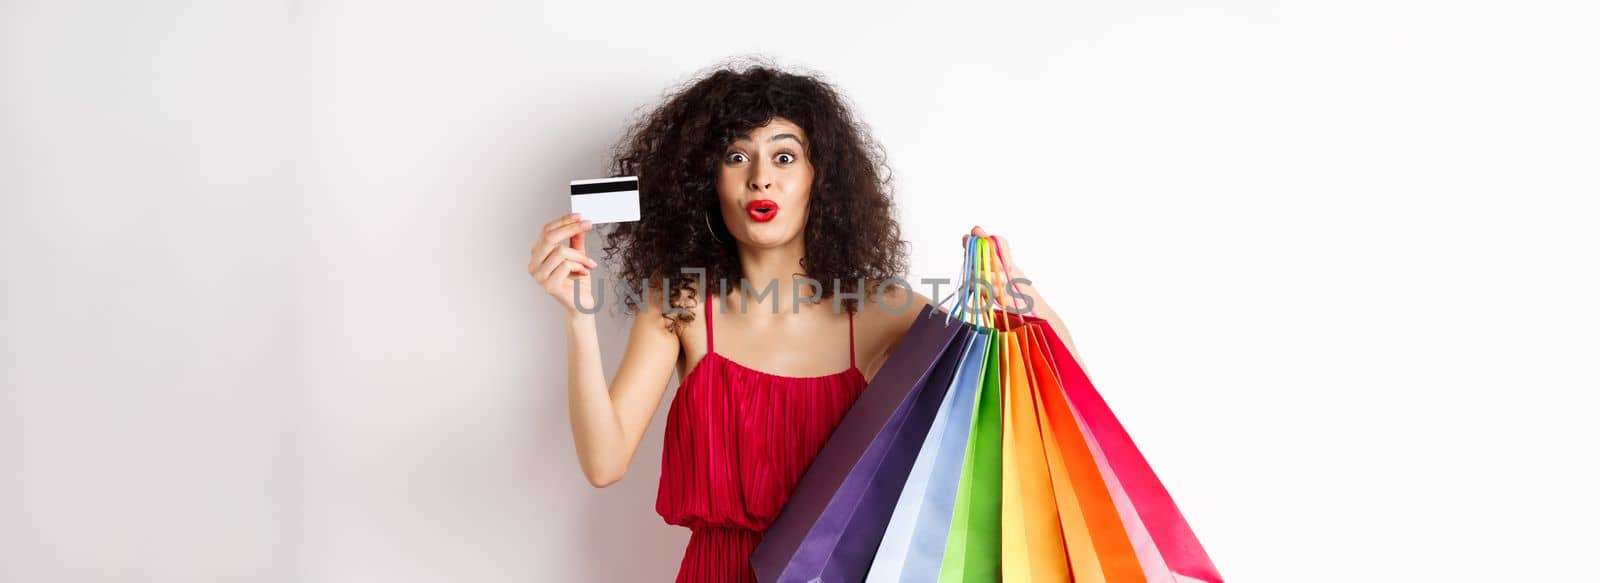 Excited woman in red dress, holding shopping bags and showing plastic credit card, shop with discounts, white background.